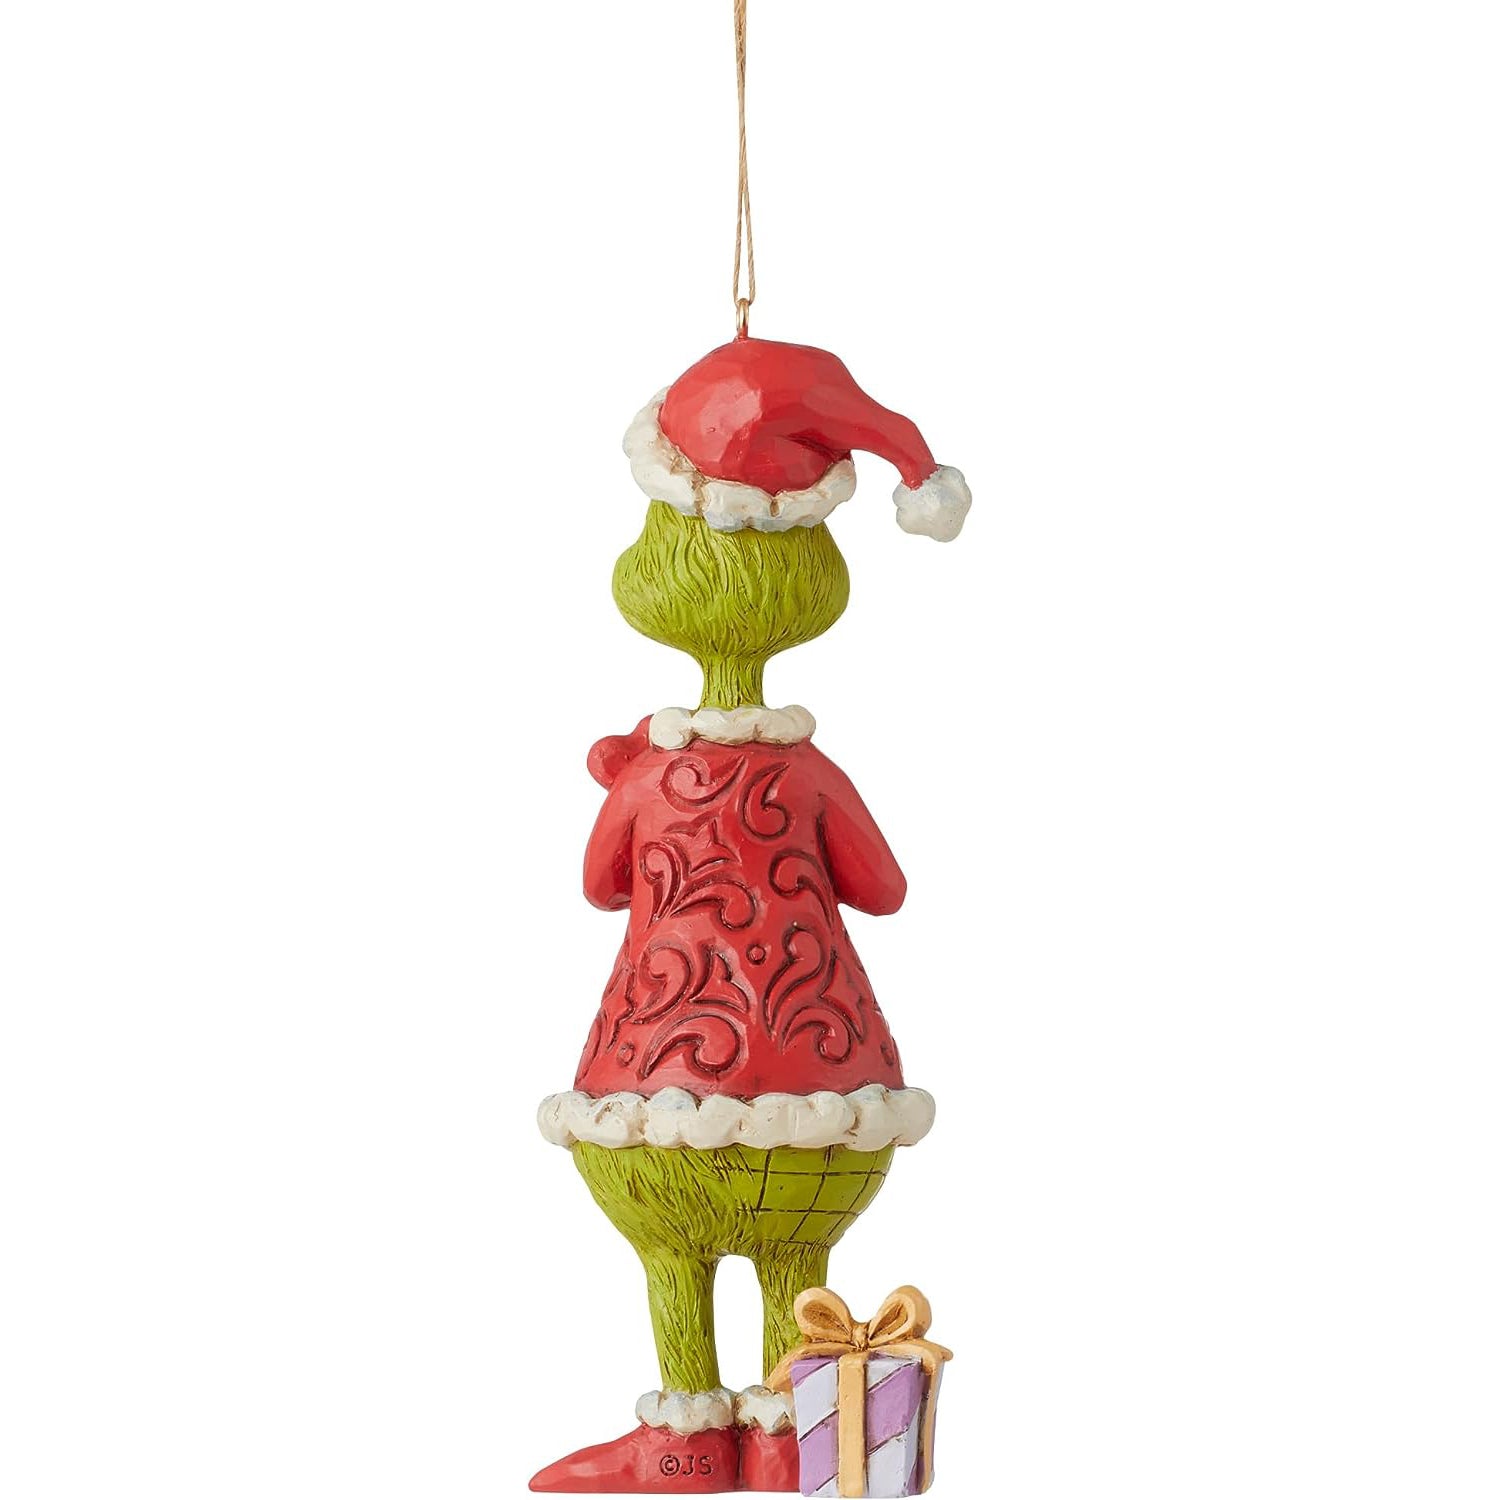 Grinch with Heart by Jim Shore ornament/pendant